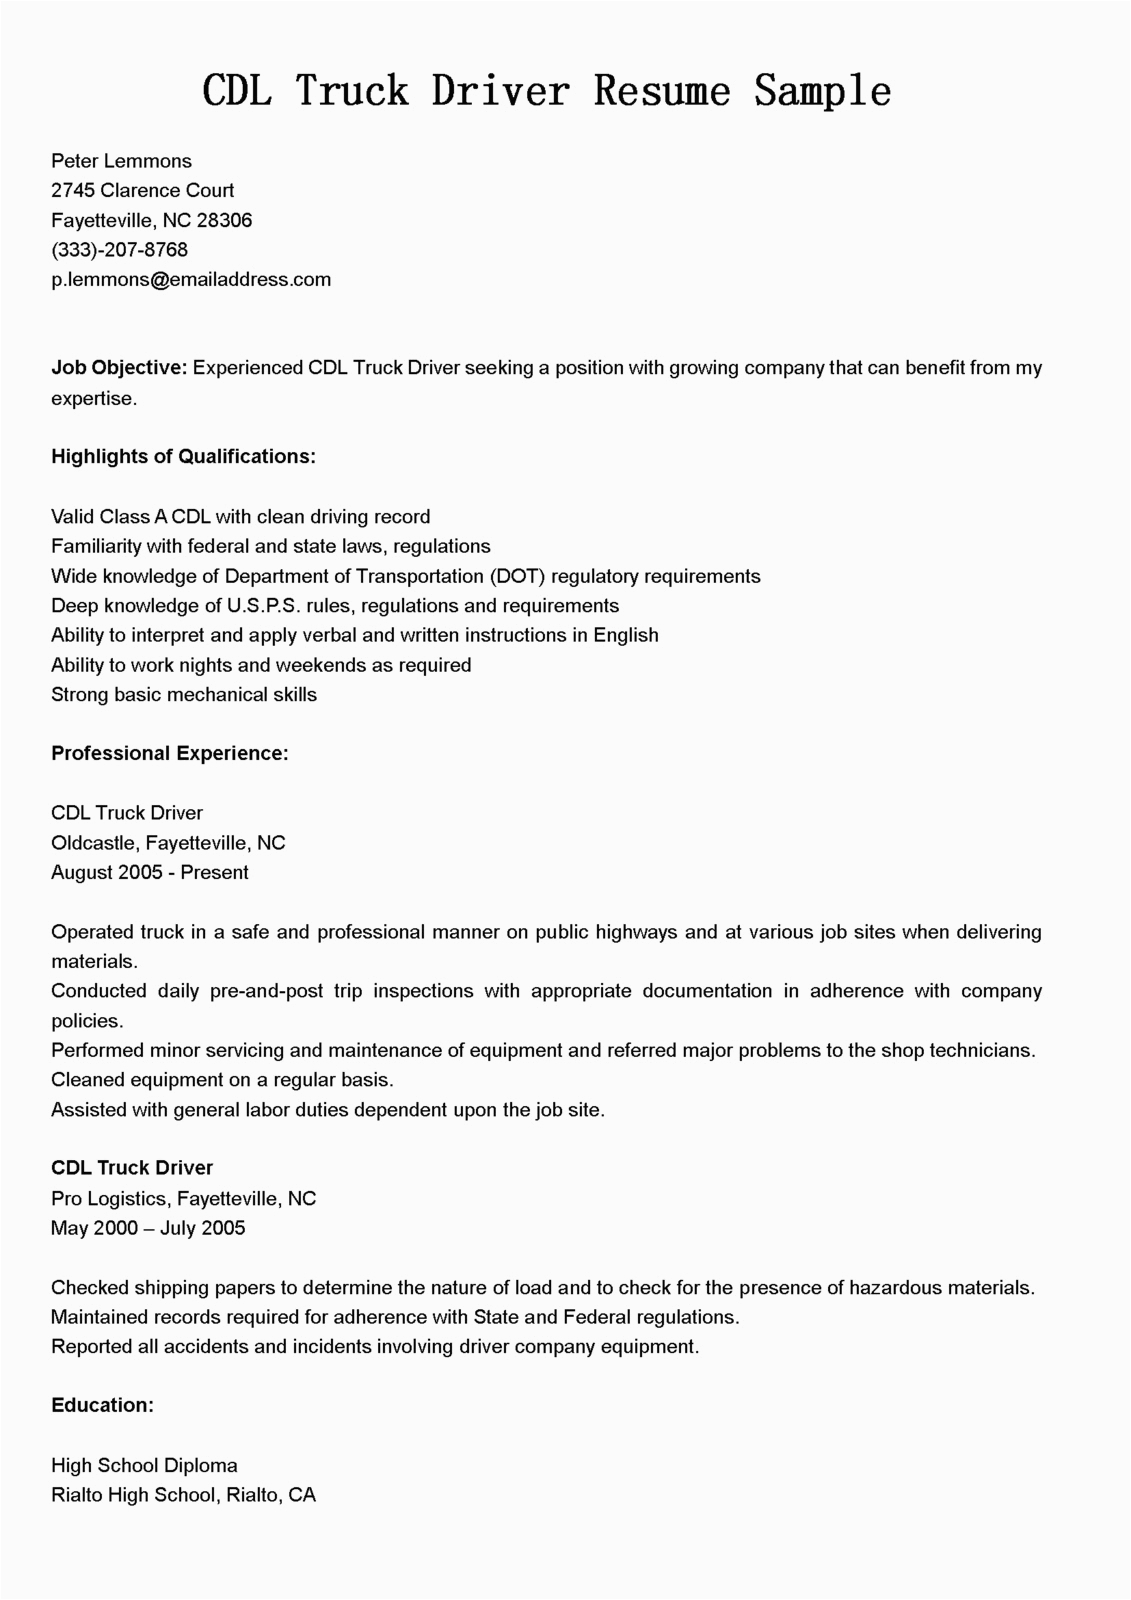 Sample Of A Cdl Truck Driver Resume Driver Resumes Cdl Truck Driver Resume Sample